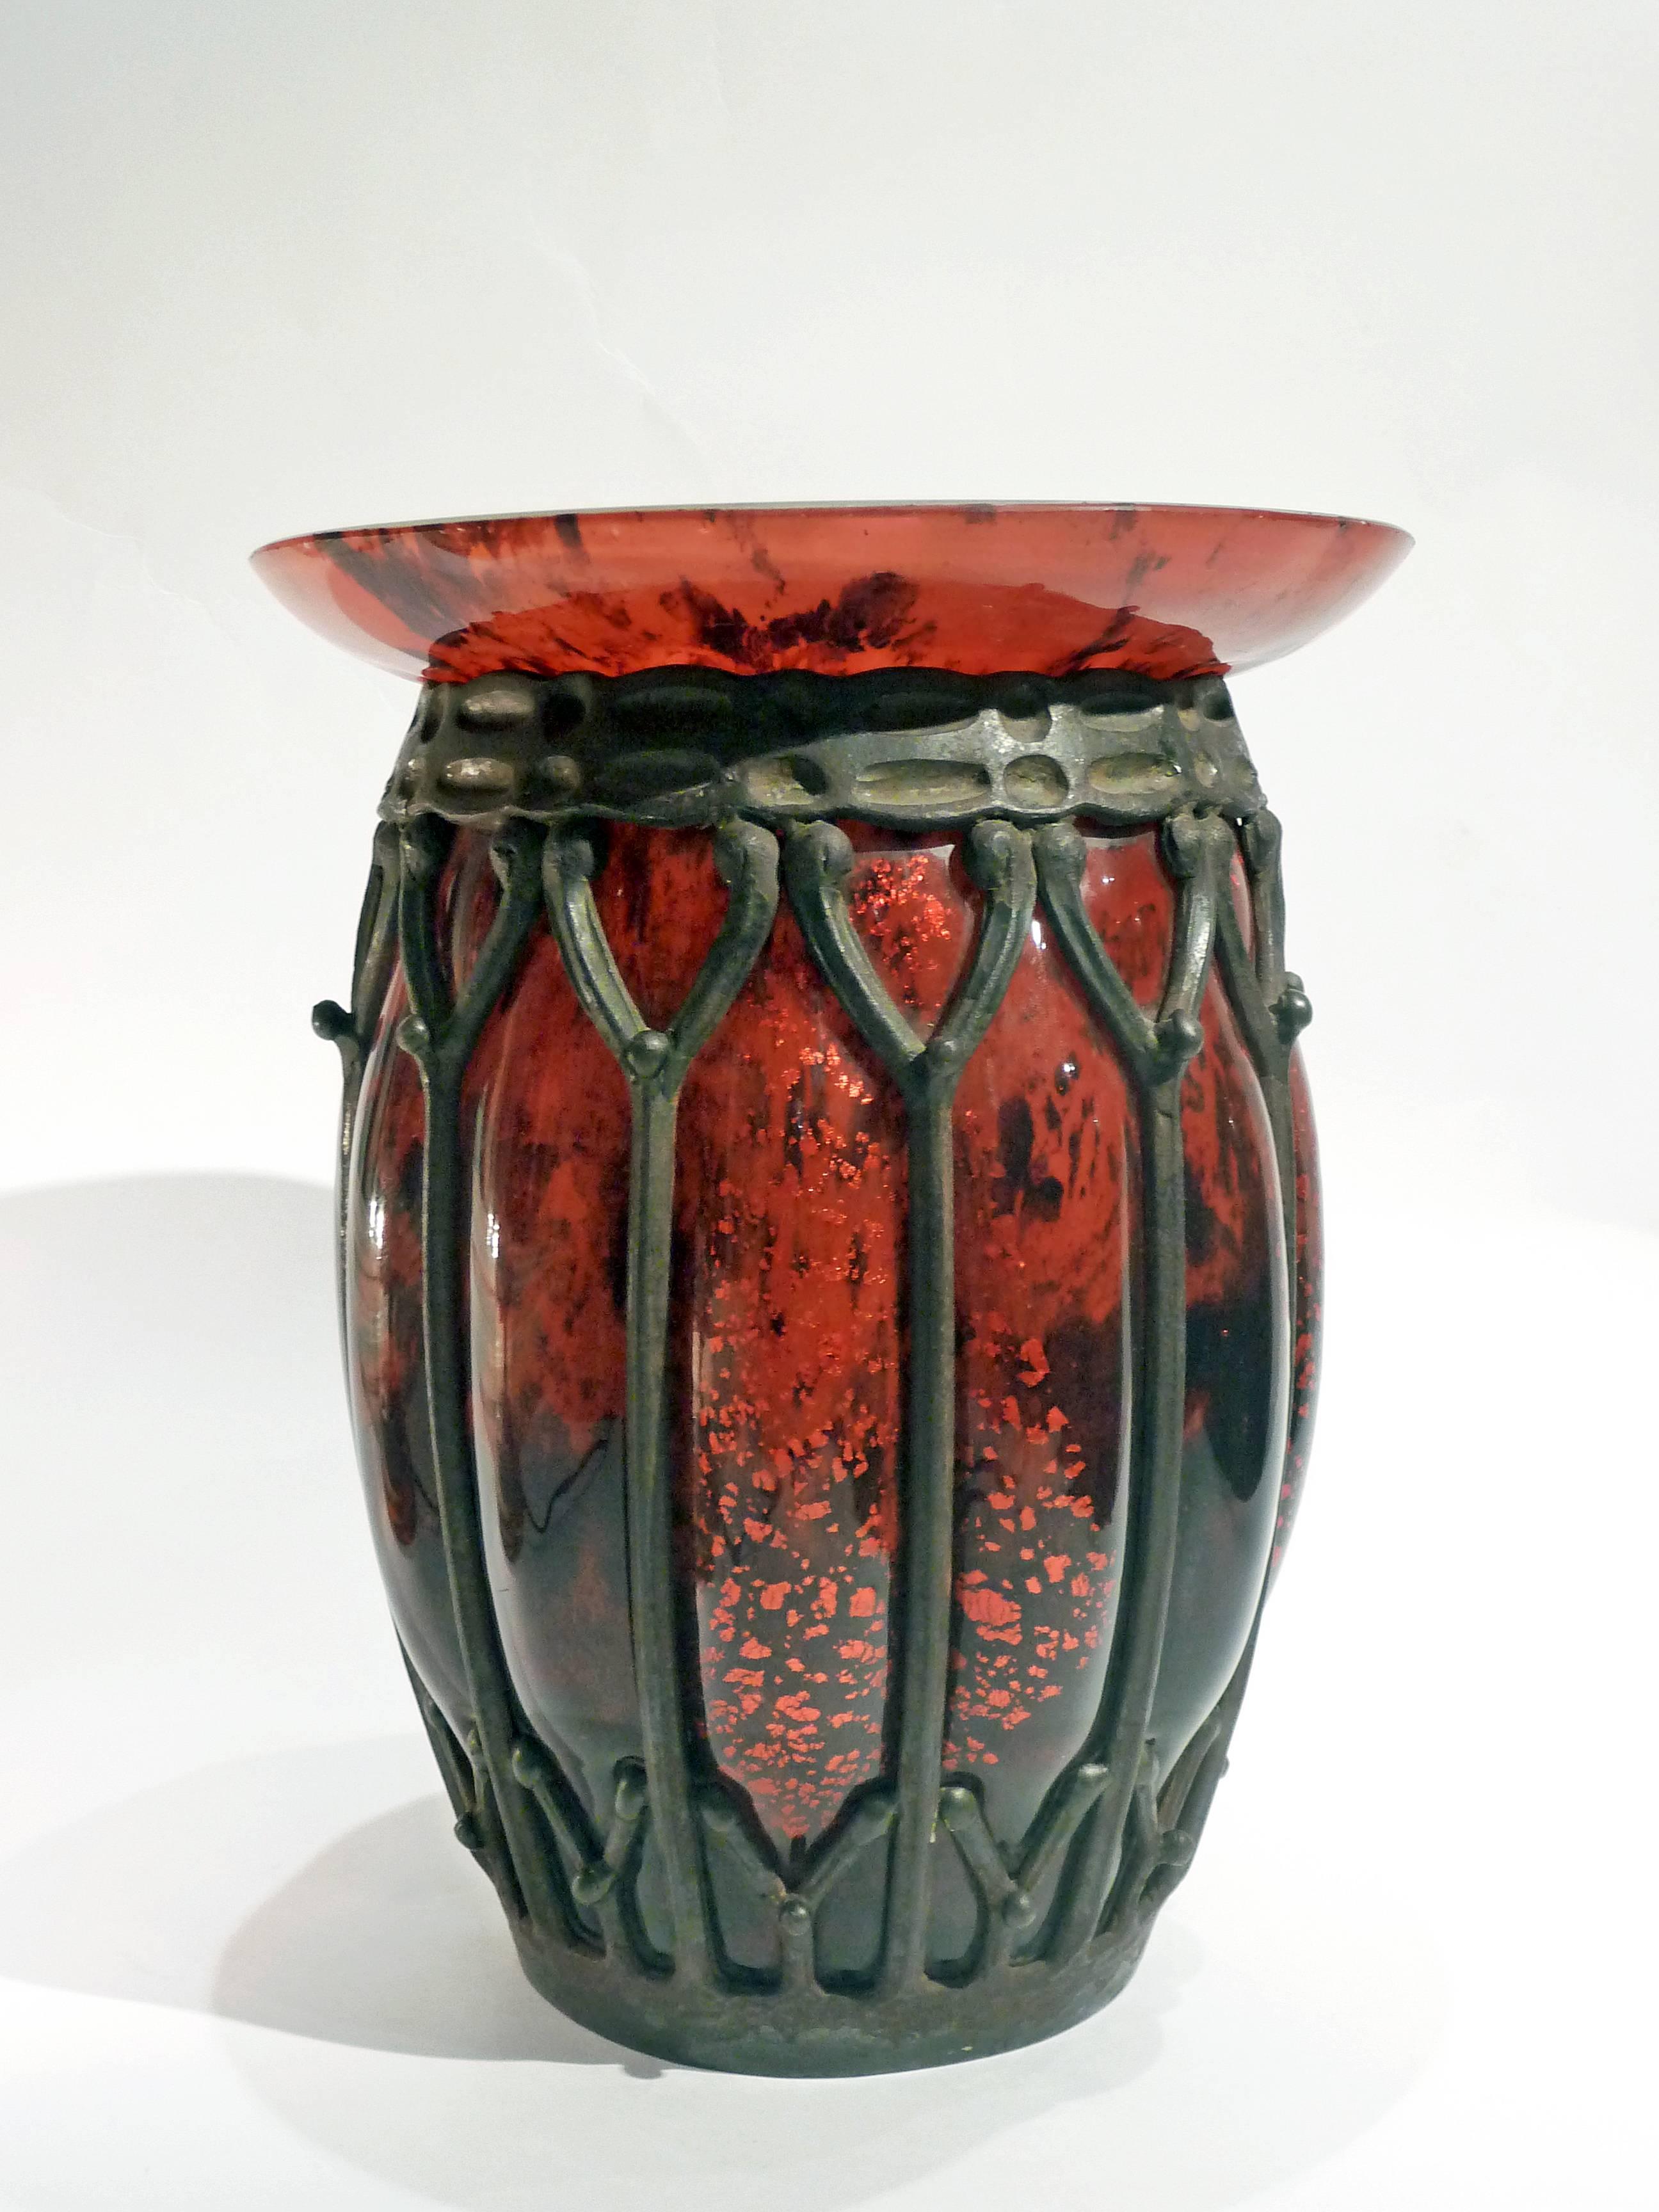 Louis Majorelle
Daum Nancy
An Art Deco wrought iron and blown glass vase with internal red inclusions
Signed.